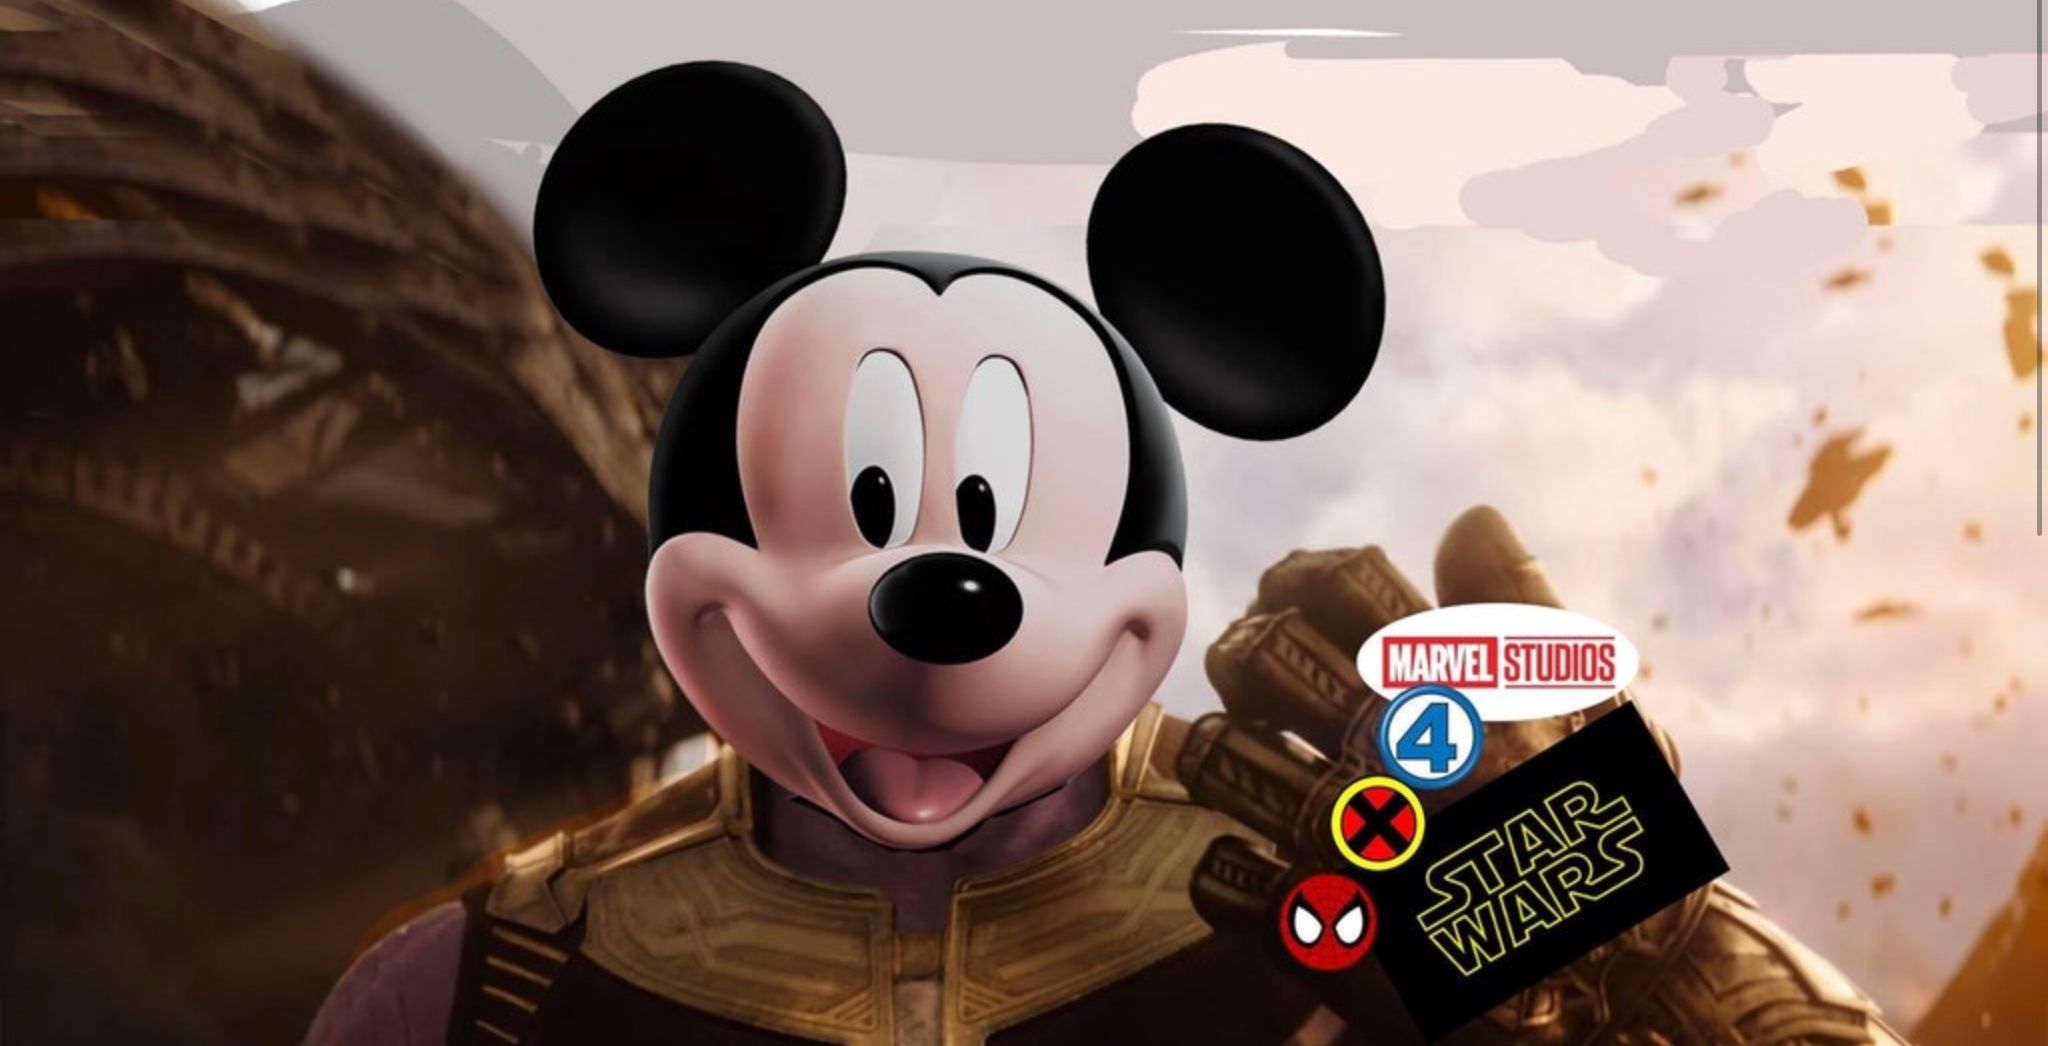 MIckey Mouse with the Infinity Gauntlet